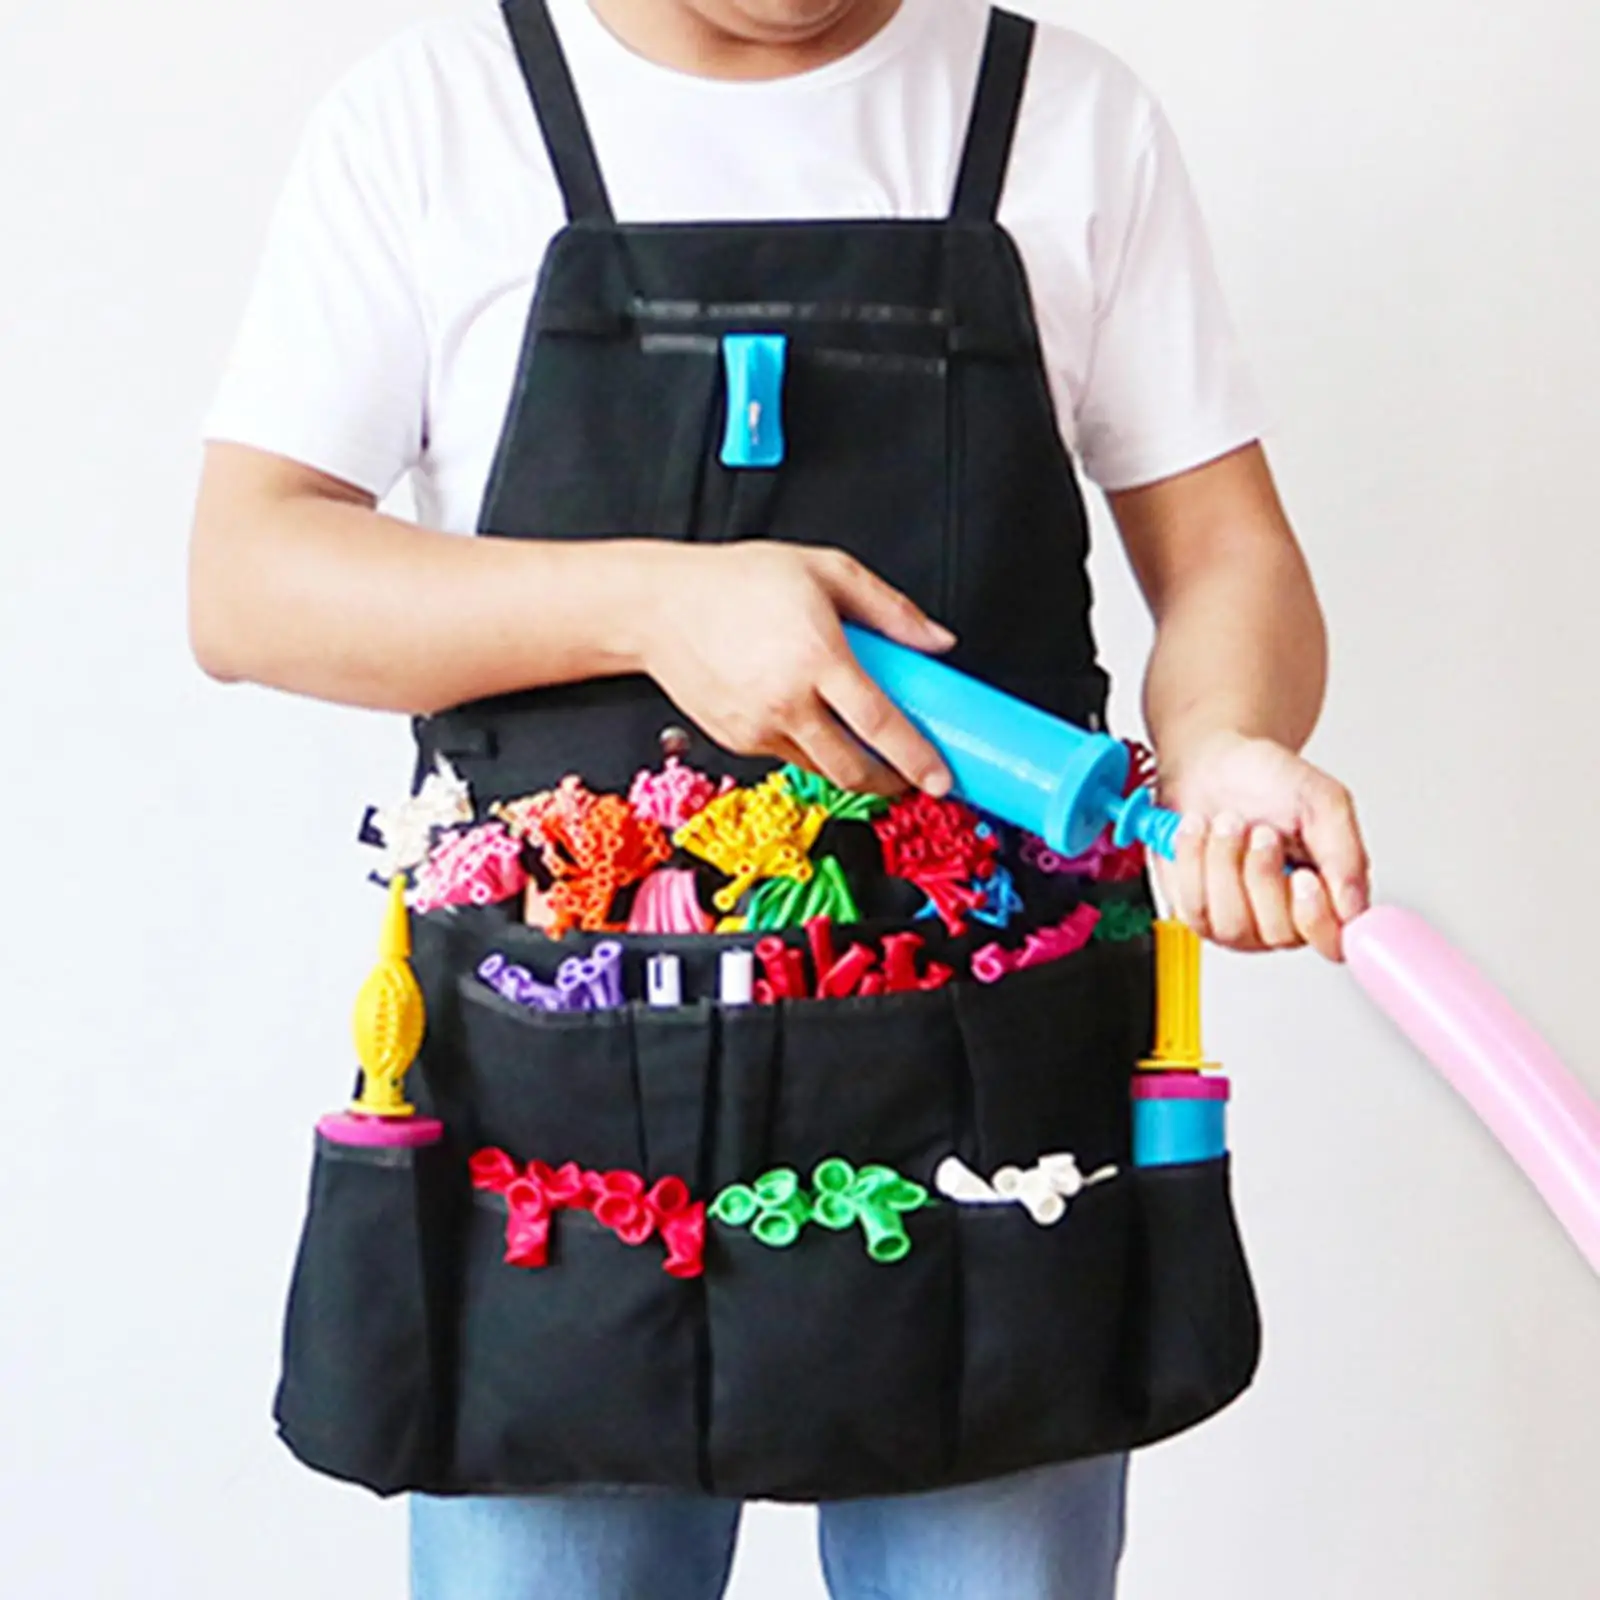 

Tools Apron Breathable Easy to Wear Resistant Multifunctional Balloon Tool Oxford Cloth Garden Tool Clown Shown Work Apron